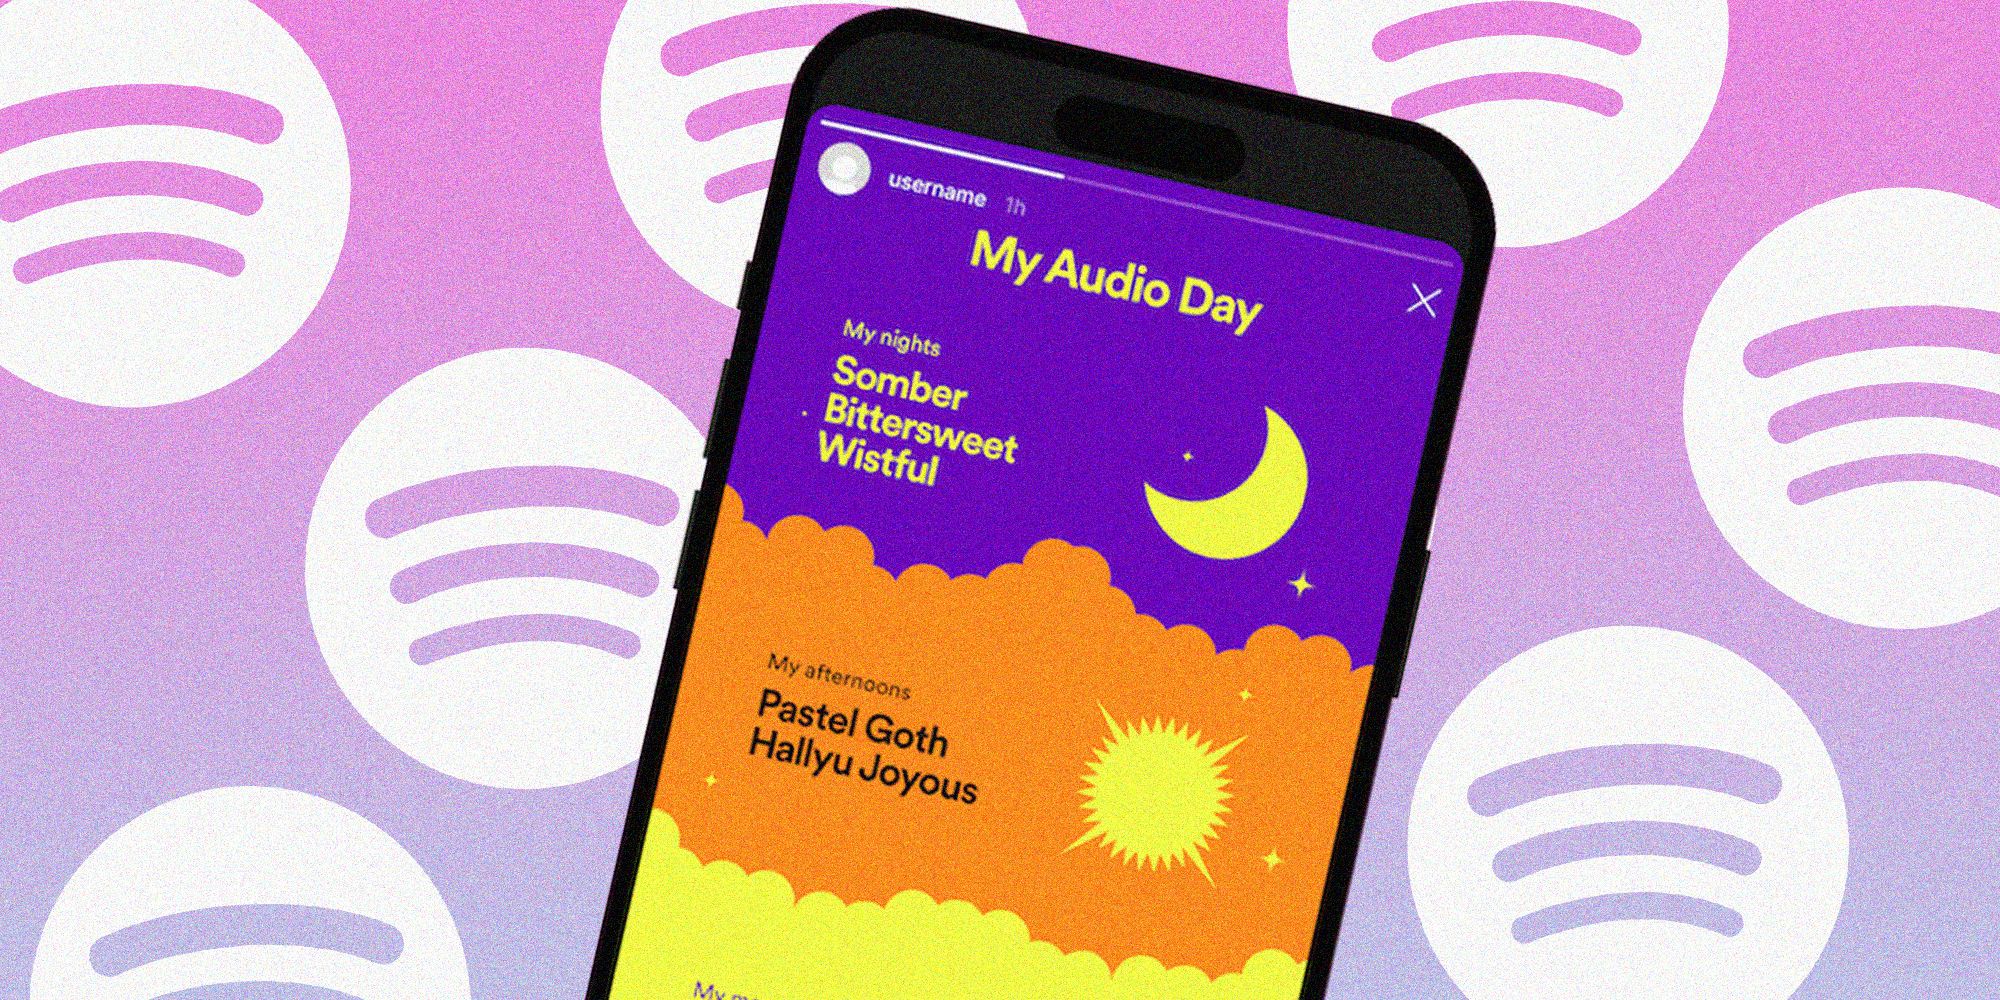 Image of the Spotify My Audio Day feature